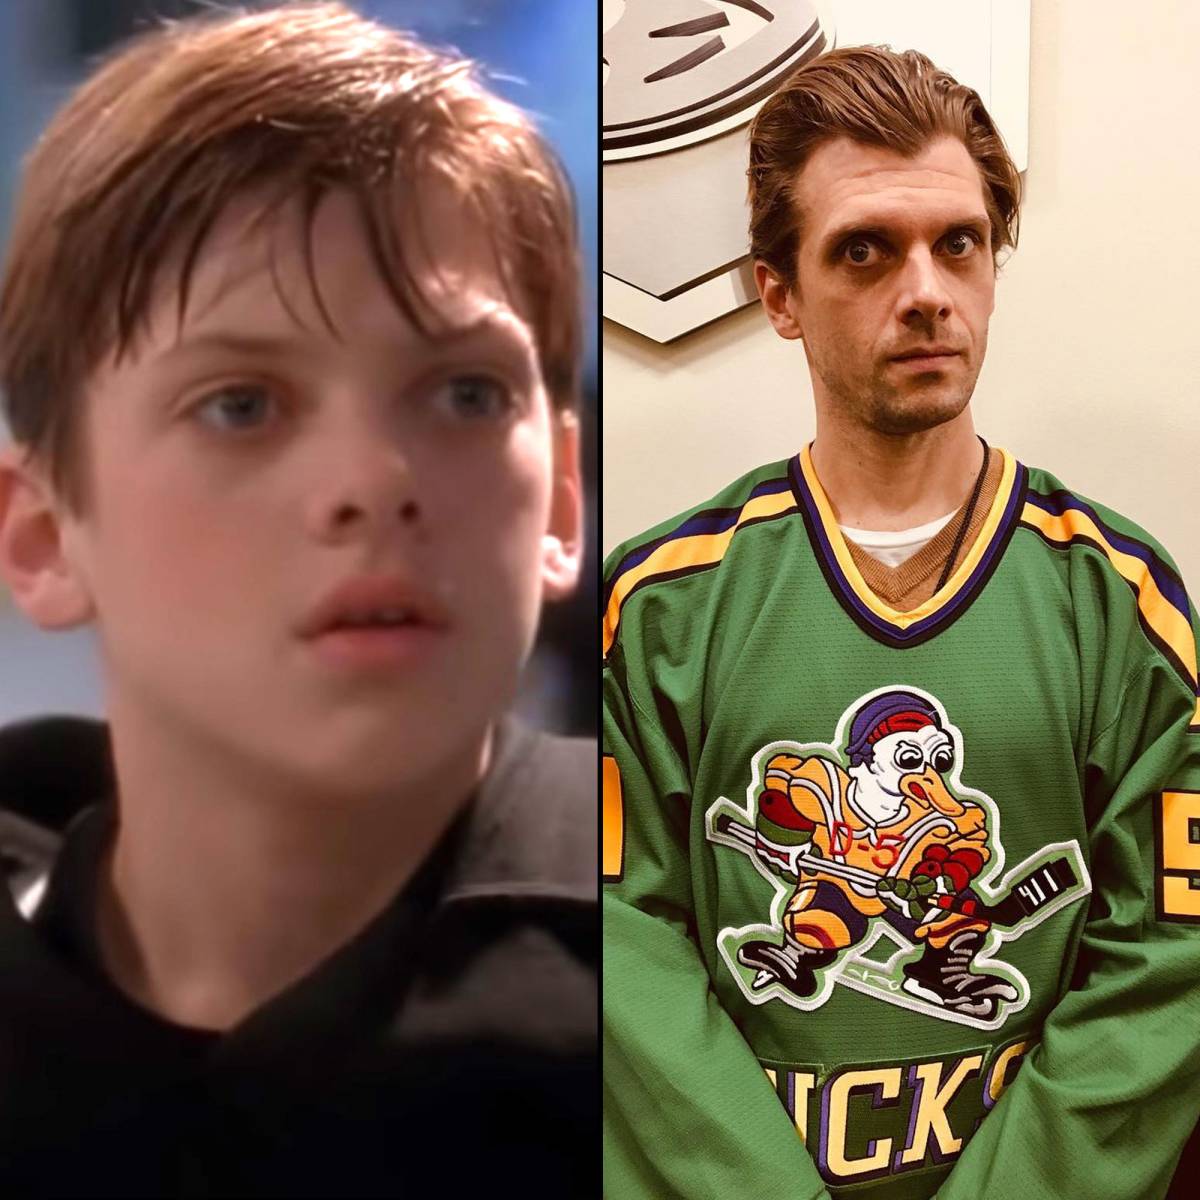 The Mighty Ducks All grown up! : r/nostalgia